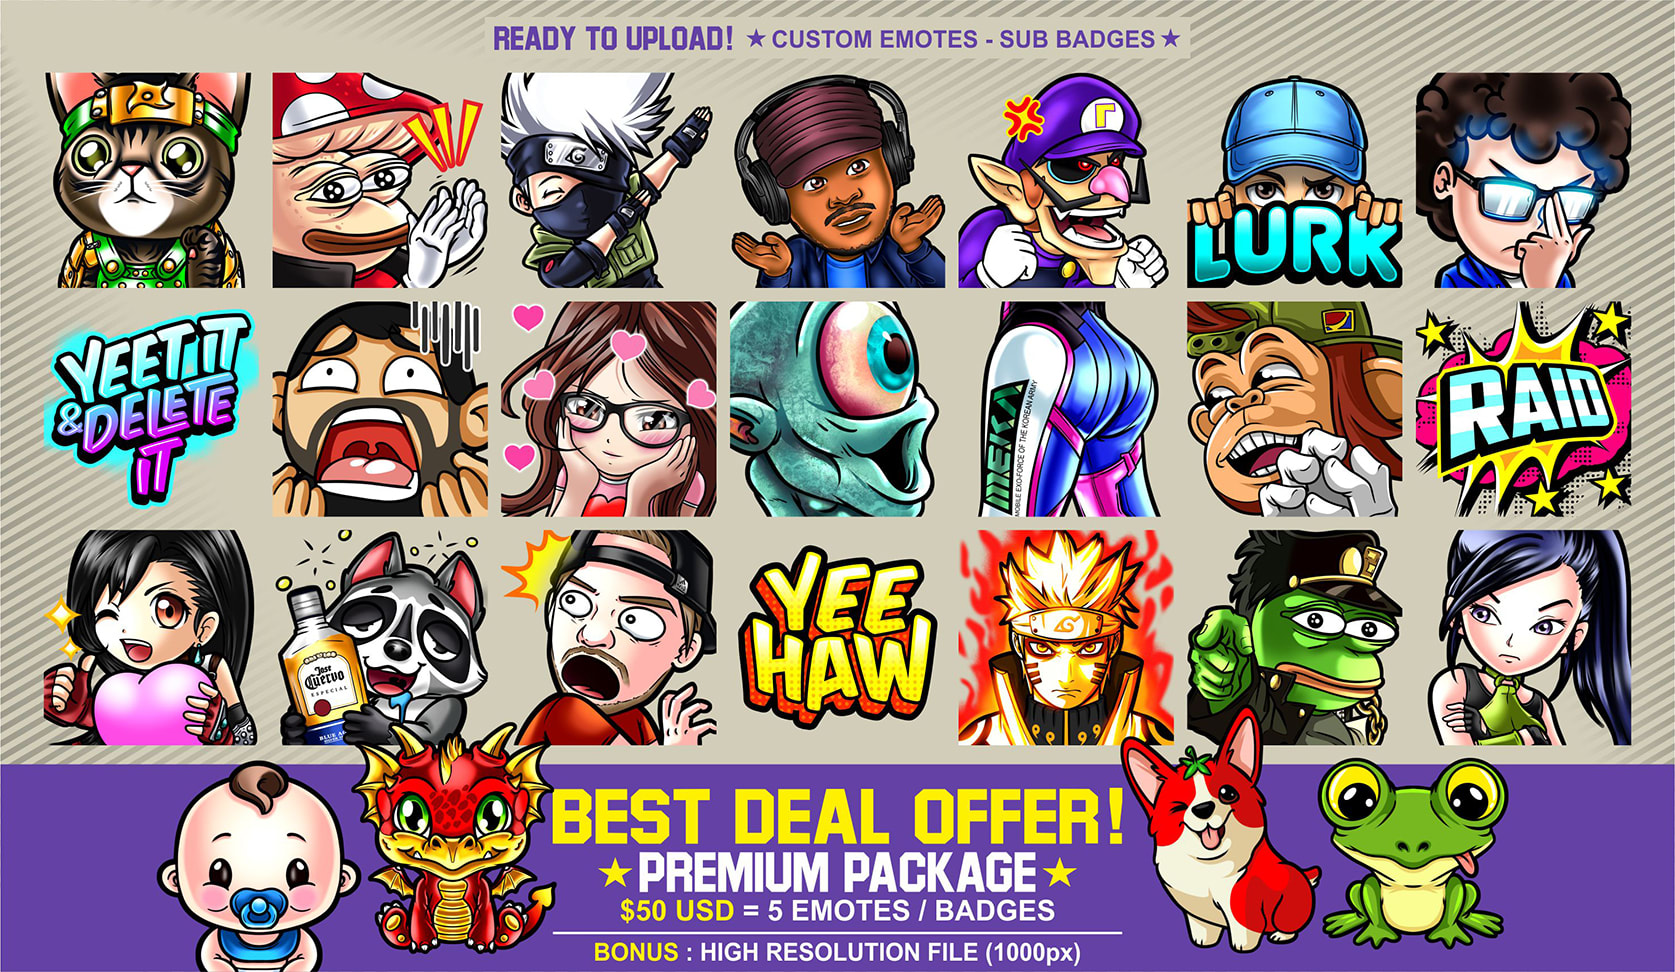 Create Premium Twitch Emotes Or Sub Badges In My Styles By Aces Go